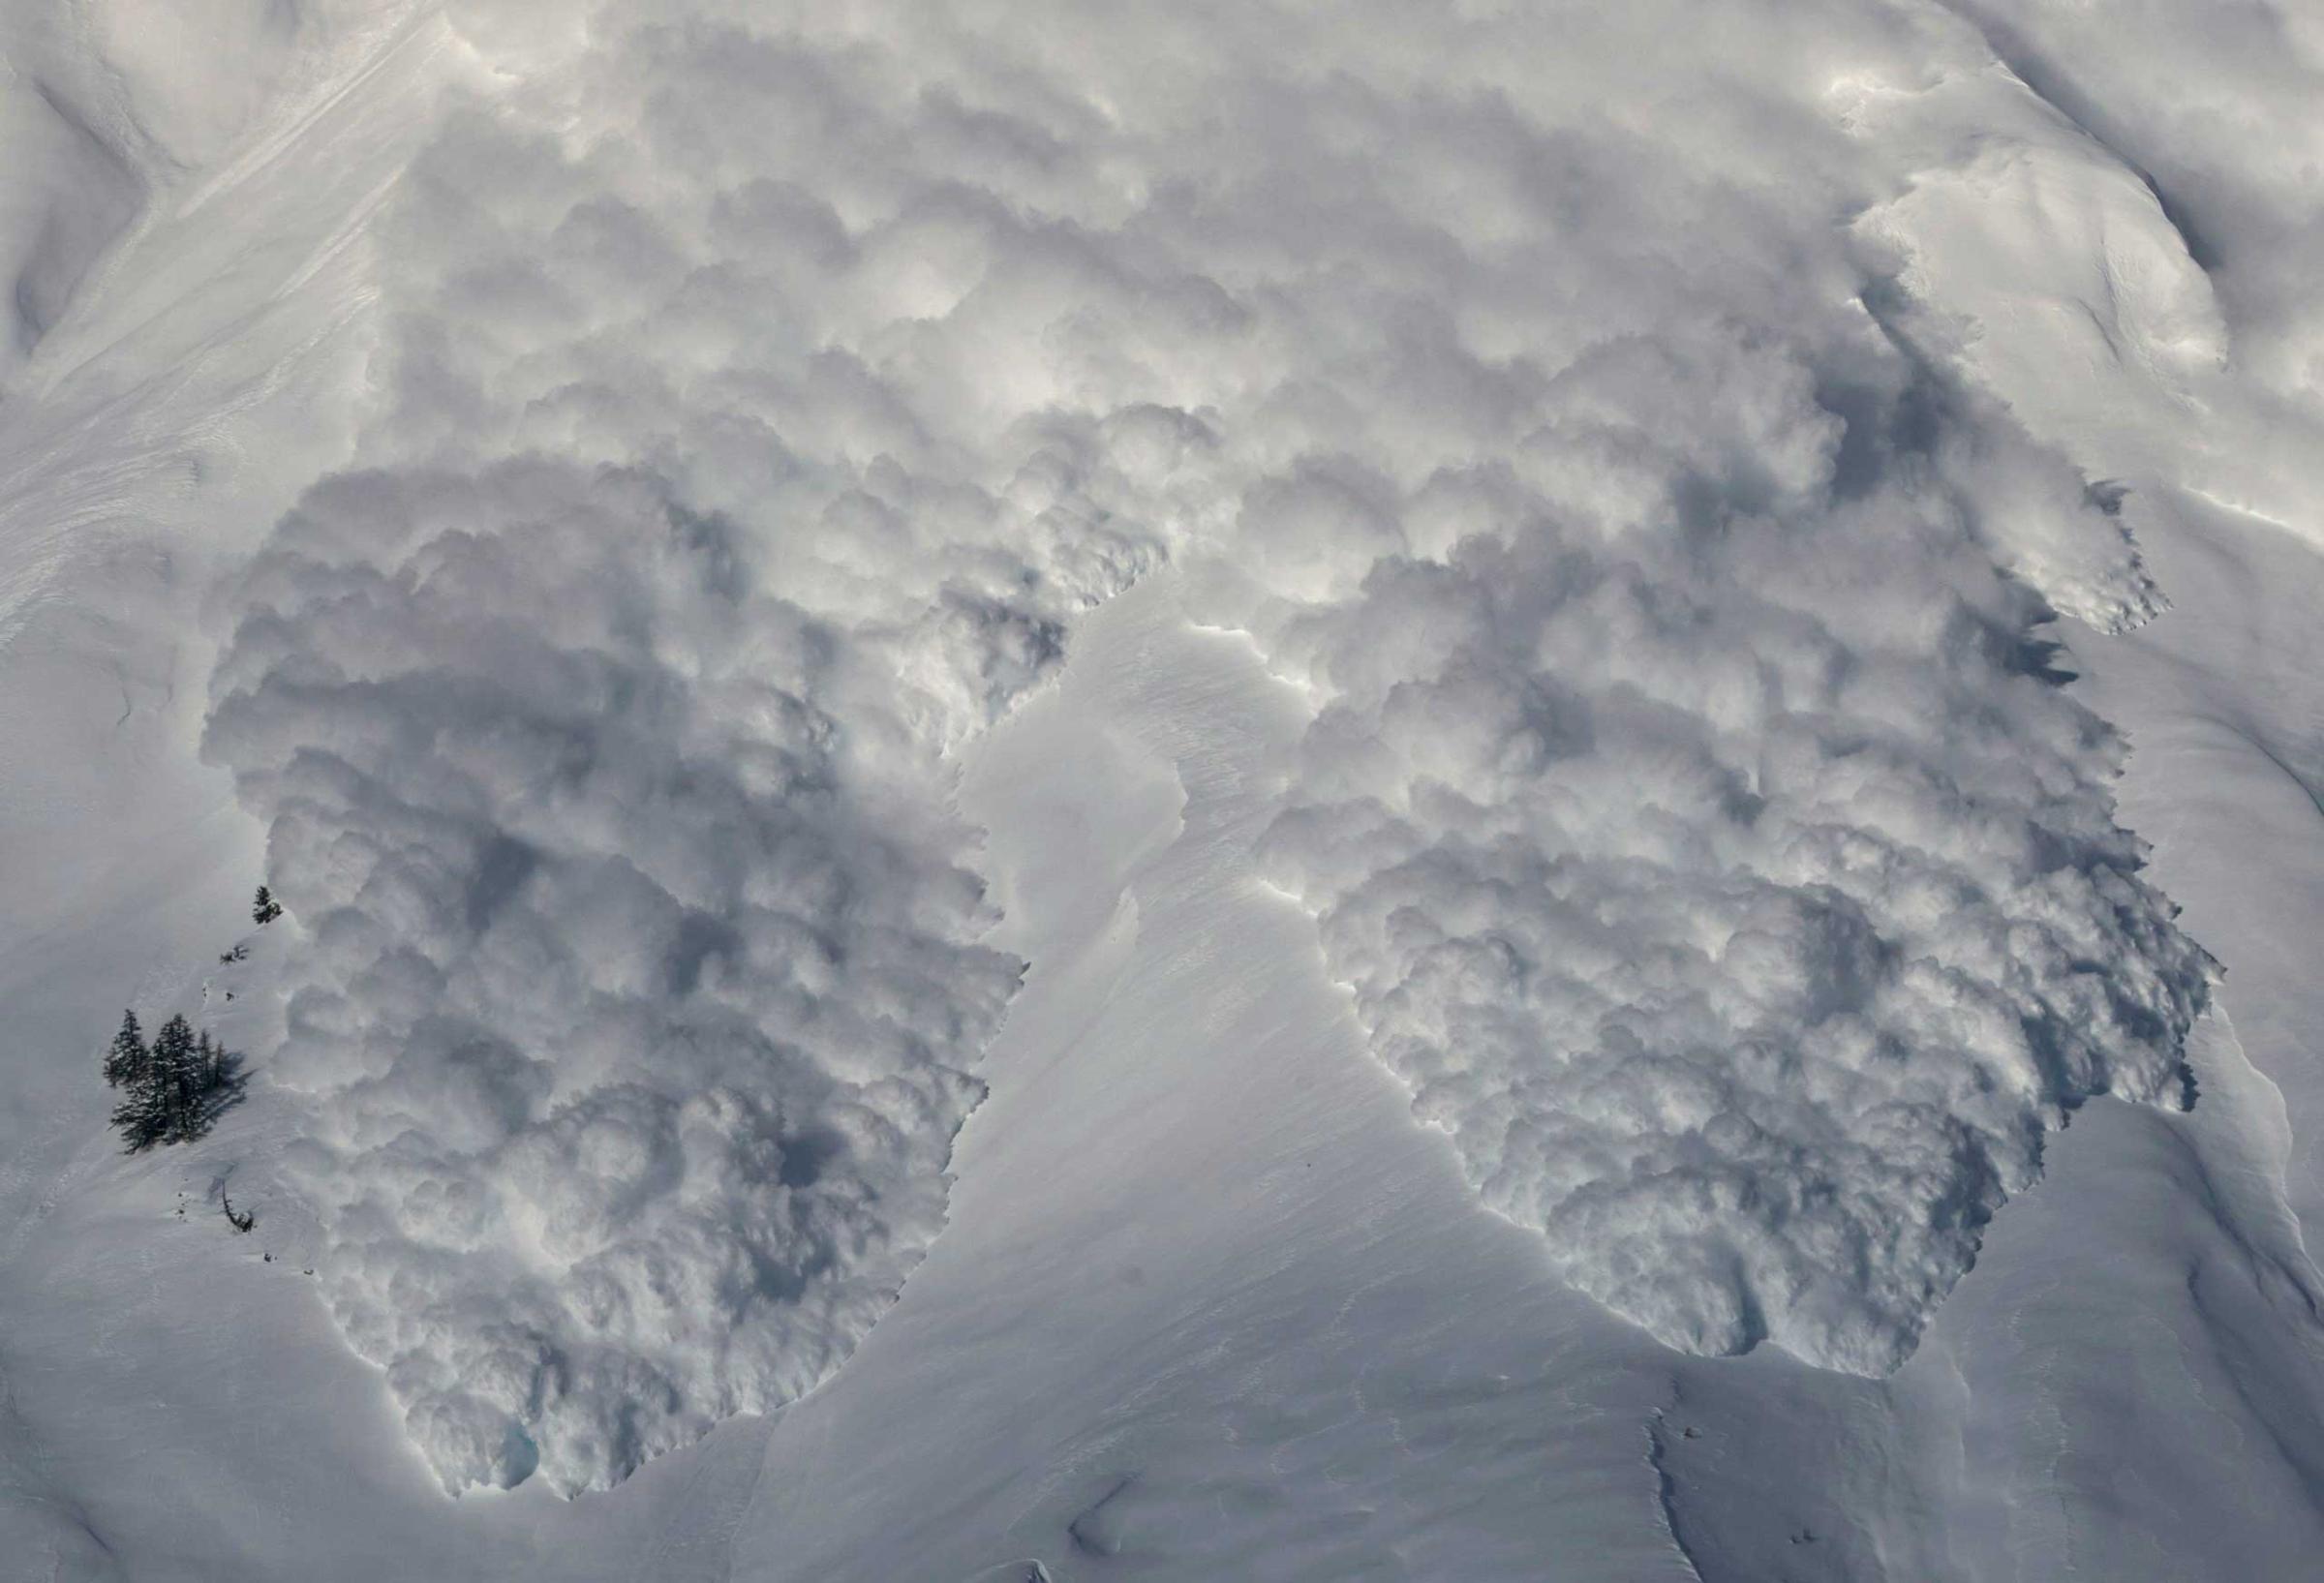 An artificially triggered avalanche thunders down a mountain side at the Vallee de la Sionne in Anzere